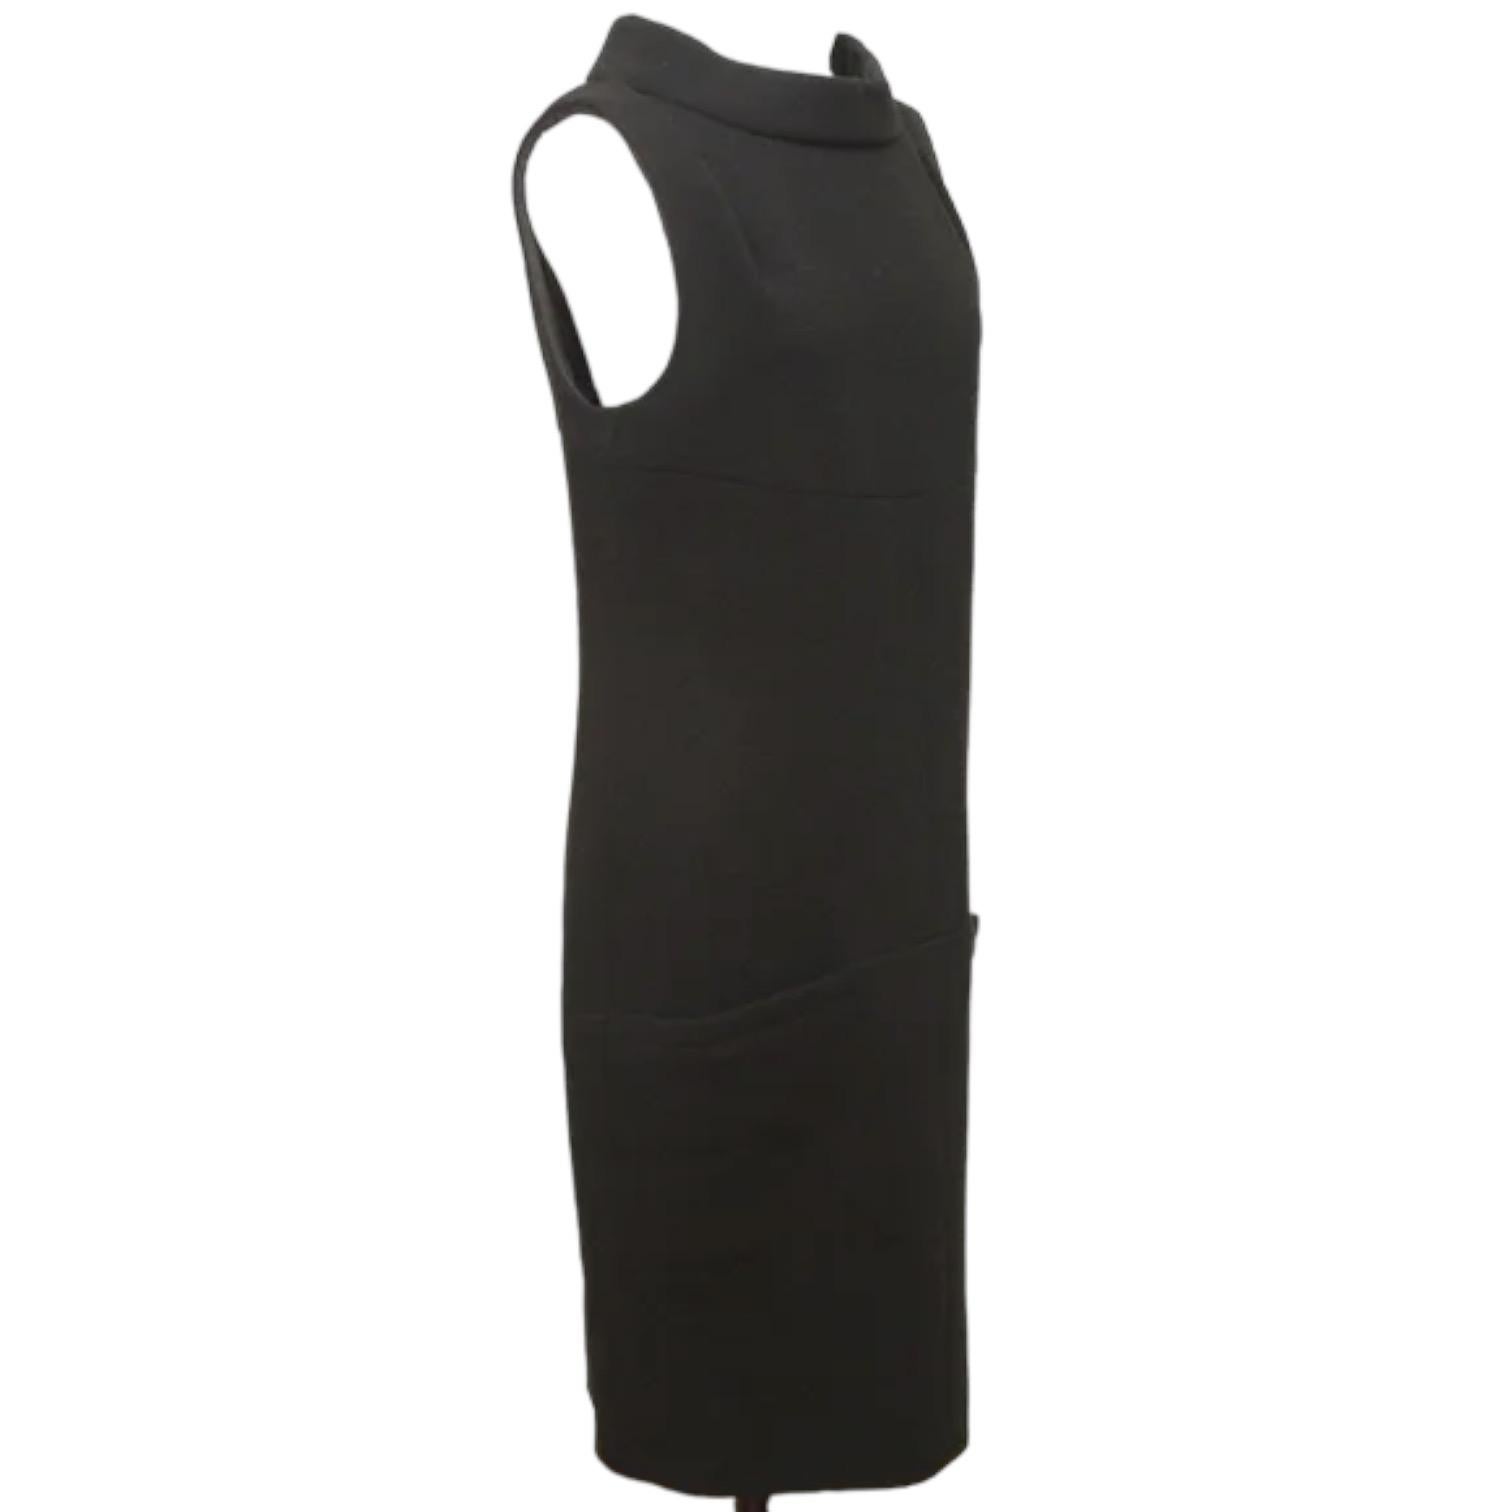 GUARANTEED AUTHENTIC CHANEL FALL 2012 BLACK COWL NECK SLEEVELESS DRESS


Design:
 - Black sleeveless shift dress.
 - Cowl neck.
 - Front slip pockets at waist-hip area.
 - Rear cutout.
 - Concealed zipper closure at center back.
 - Fully lined.
 -